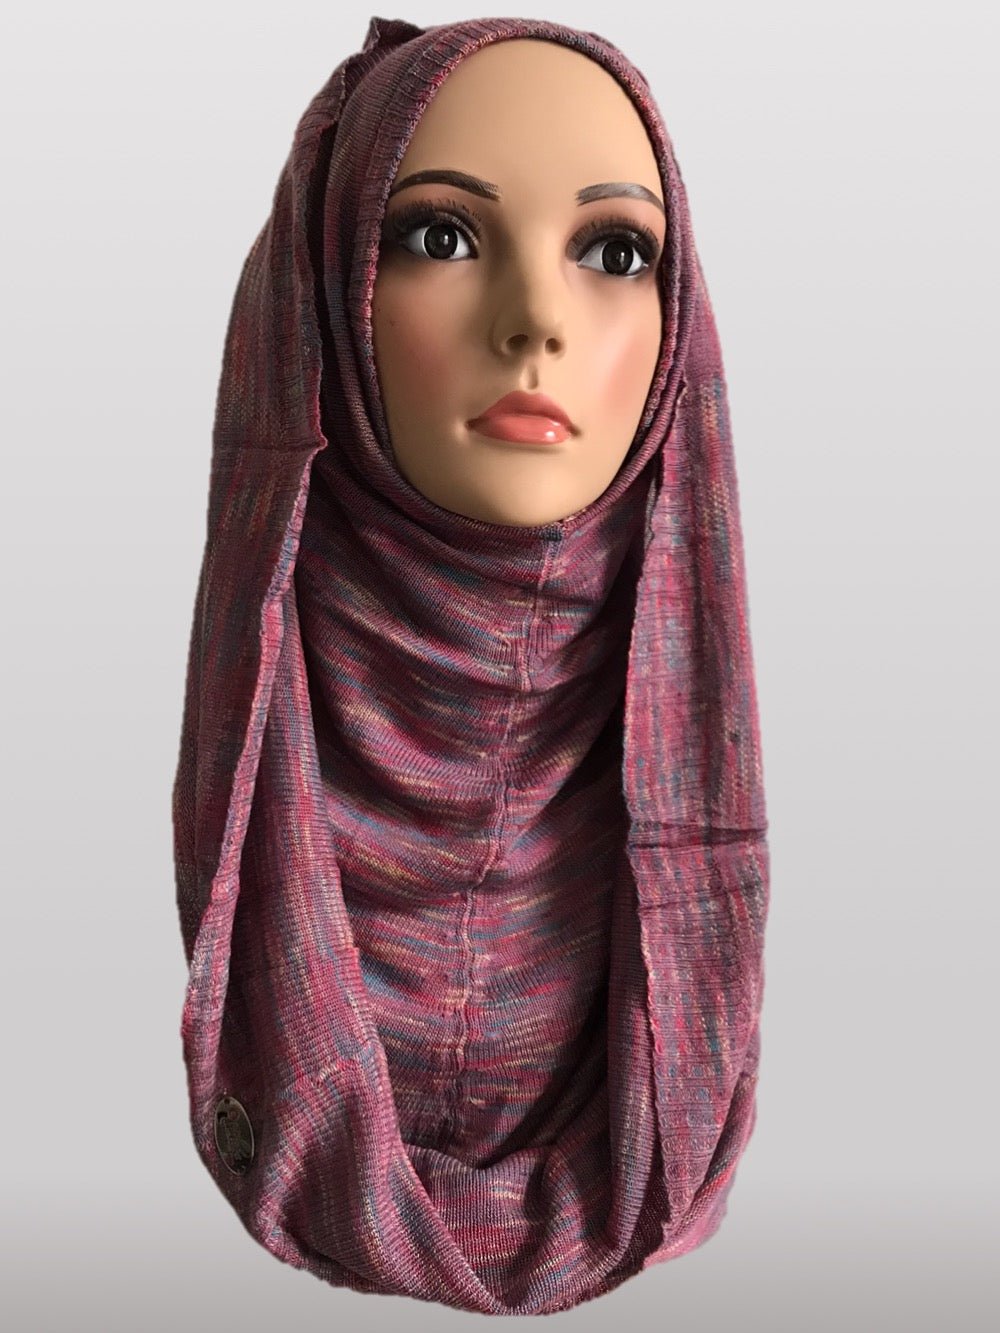 Hooded Knitted Instant Hijab Purple Pink Instant Hijabs Uk